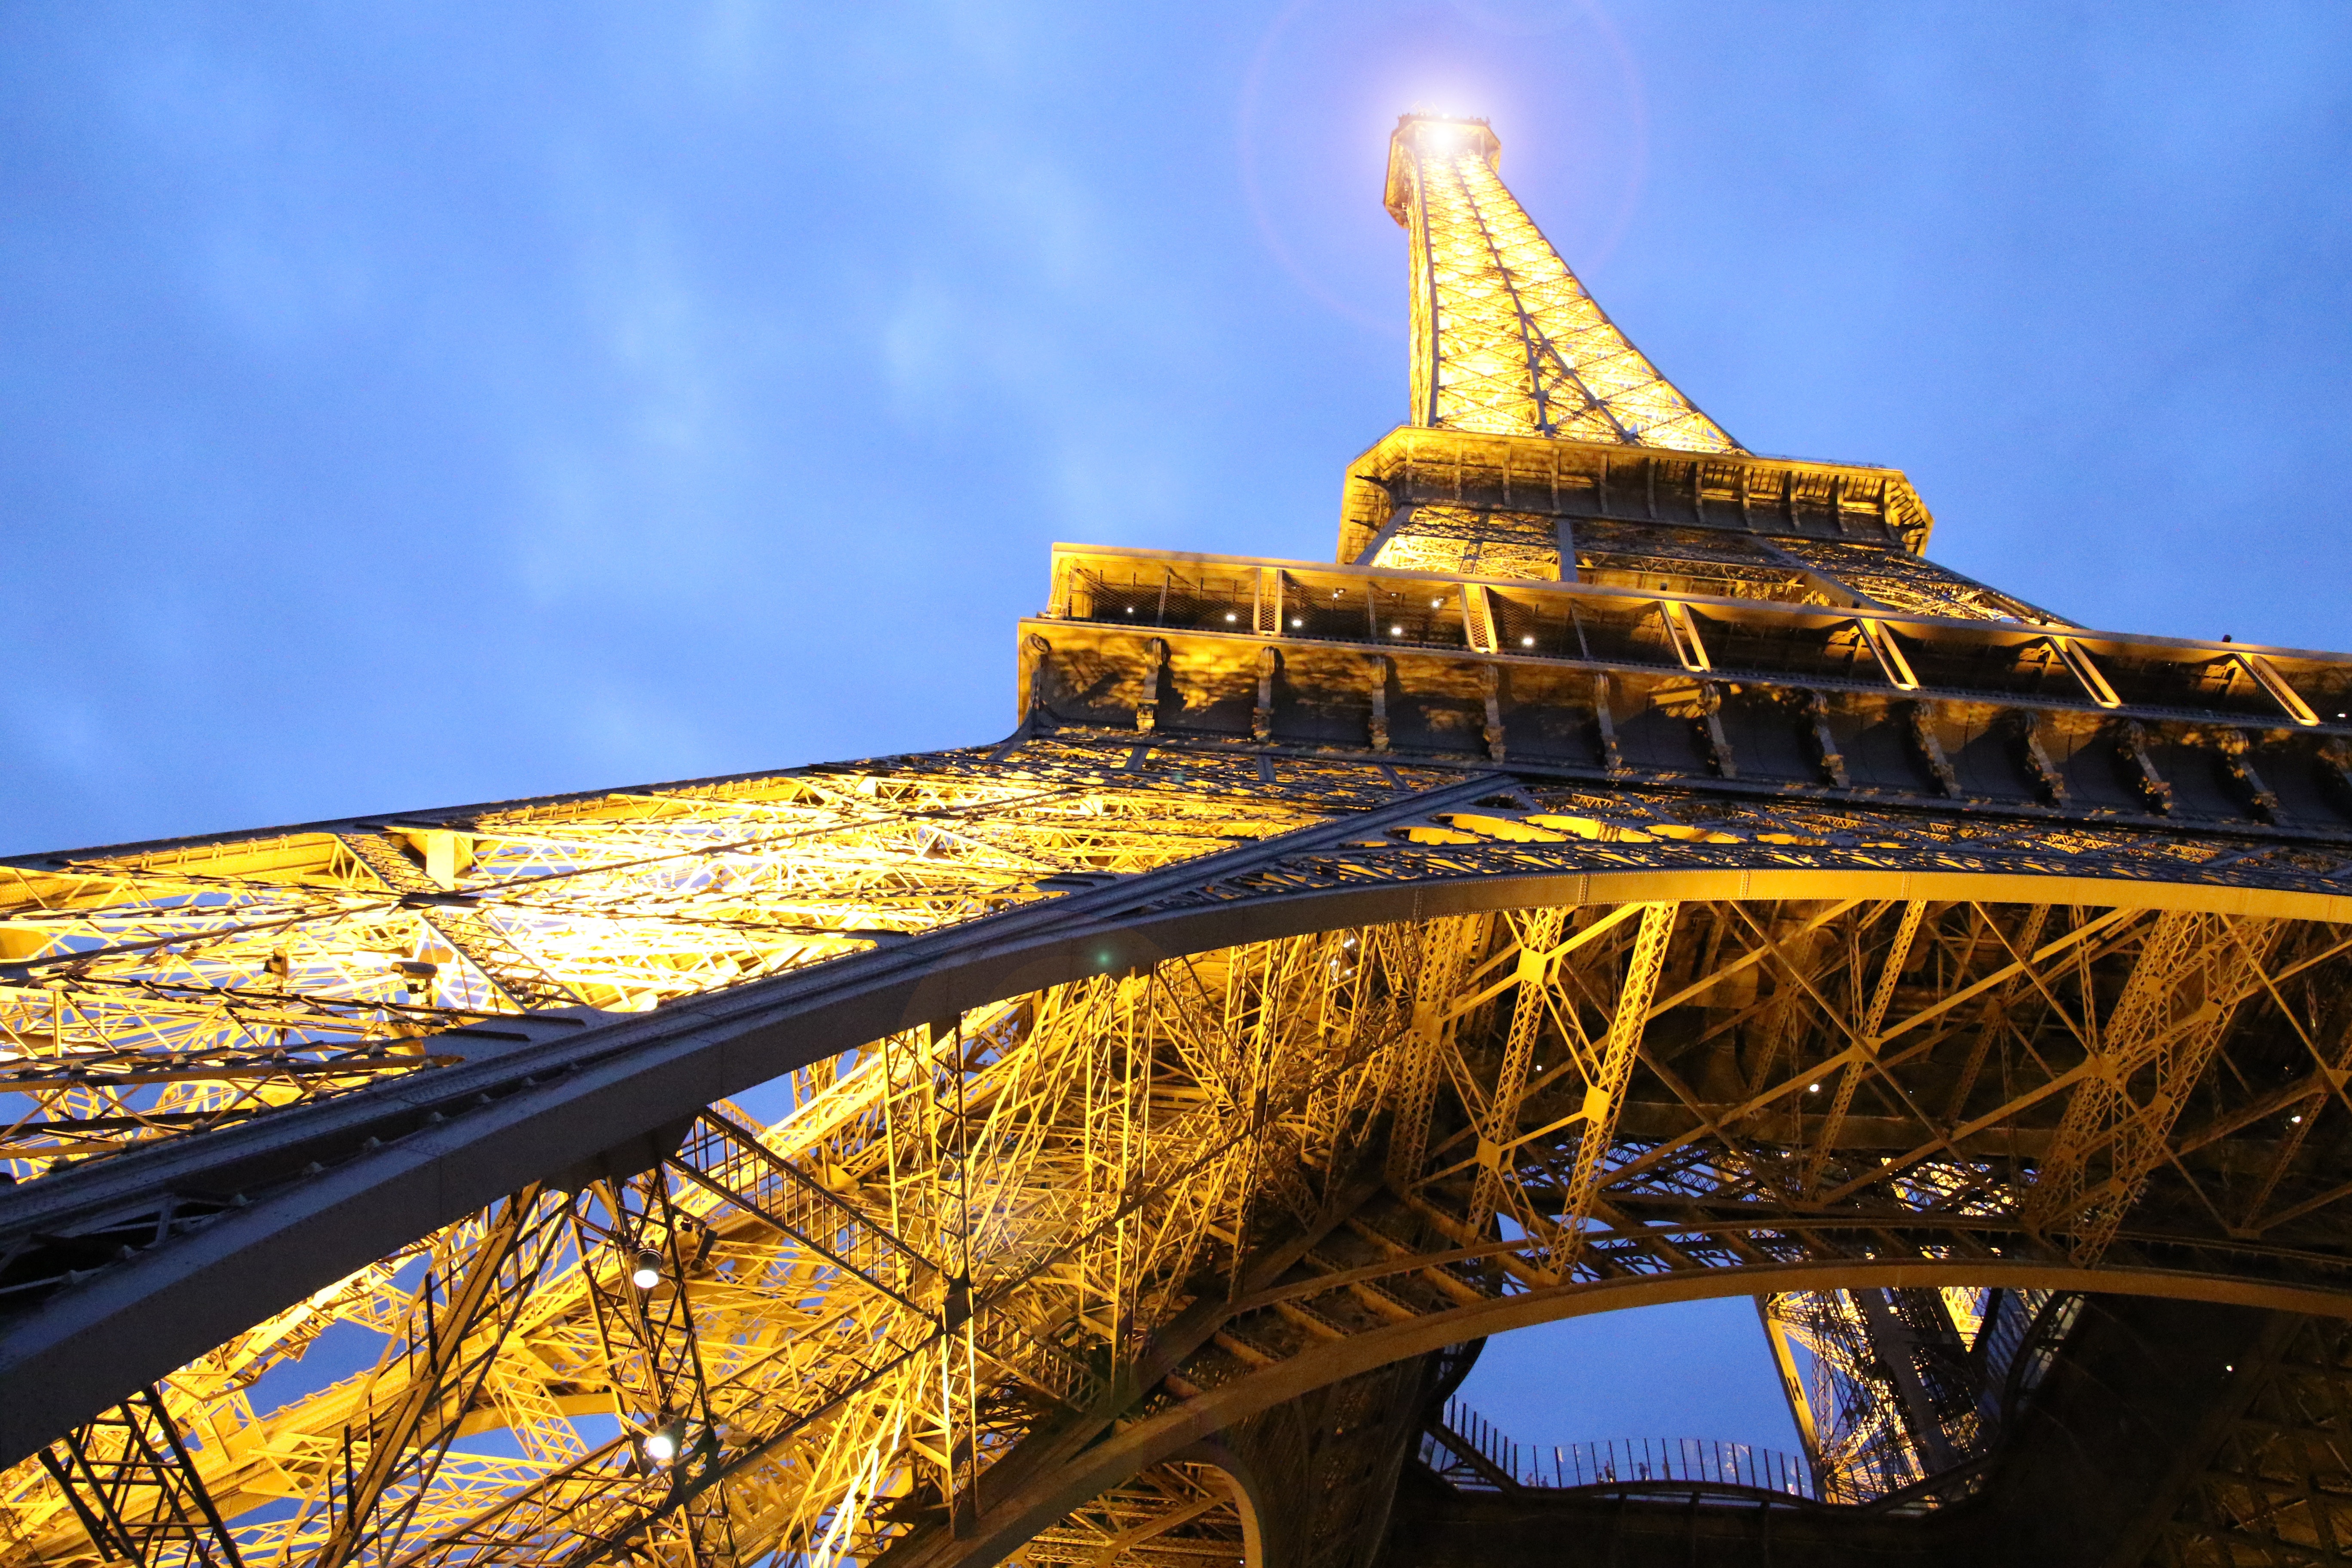 Low Angle of Eiffel Tower Paris, Architecture, Justifyyourlove, Travel, Tower, HQ Photo